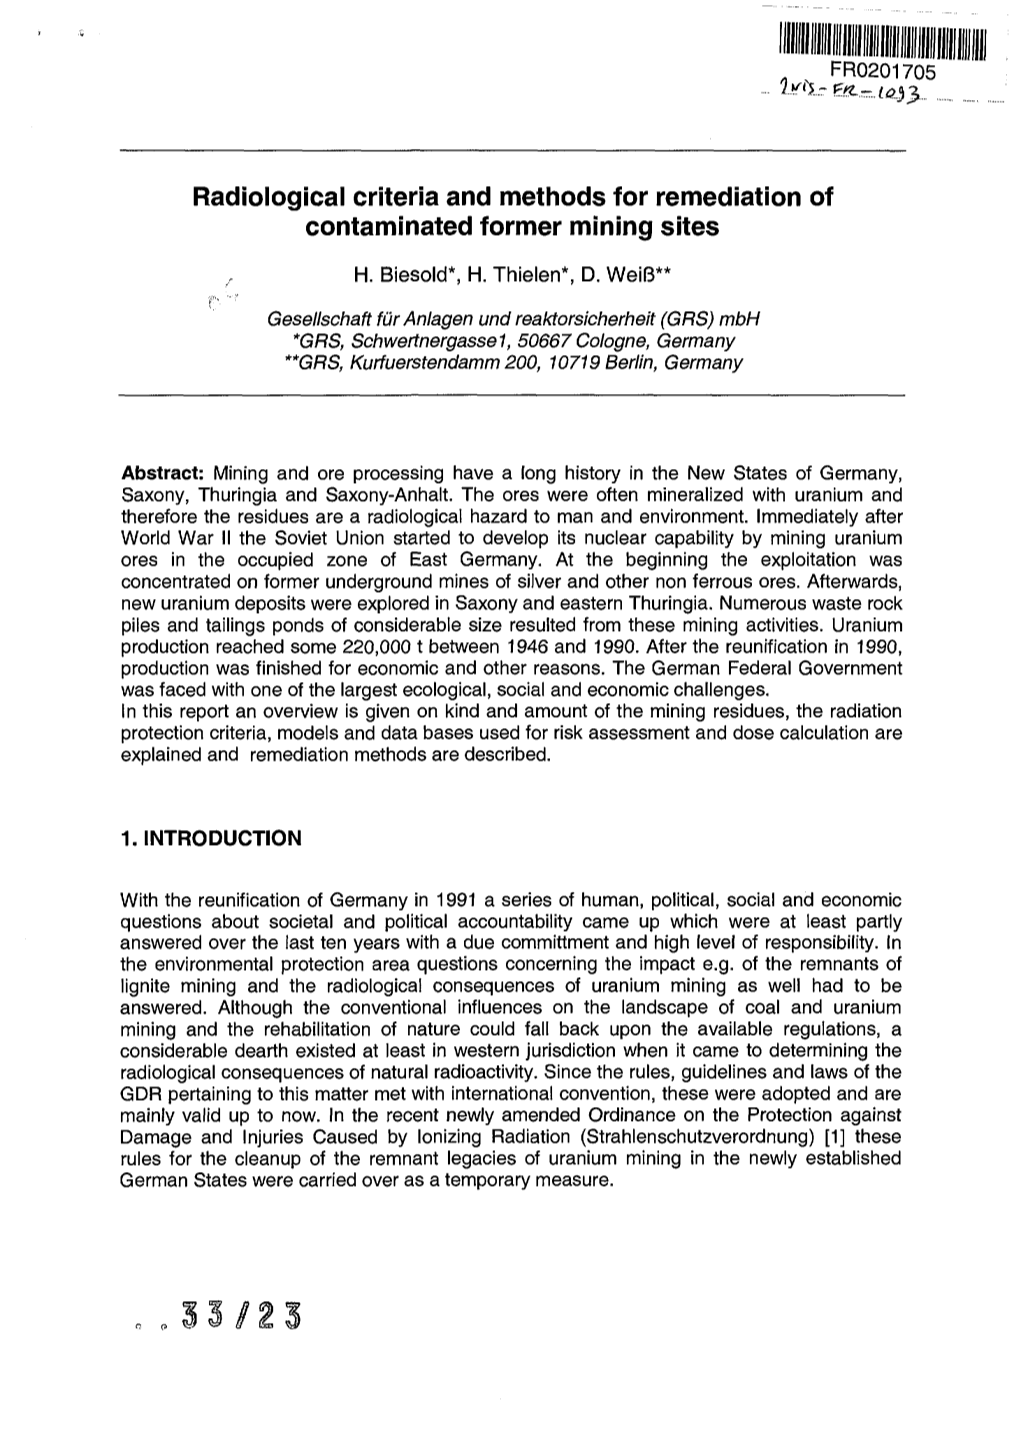 Radiological Criteria and Methods for Remediation of Contaminated Former Mining Sites